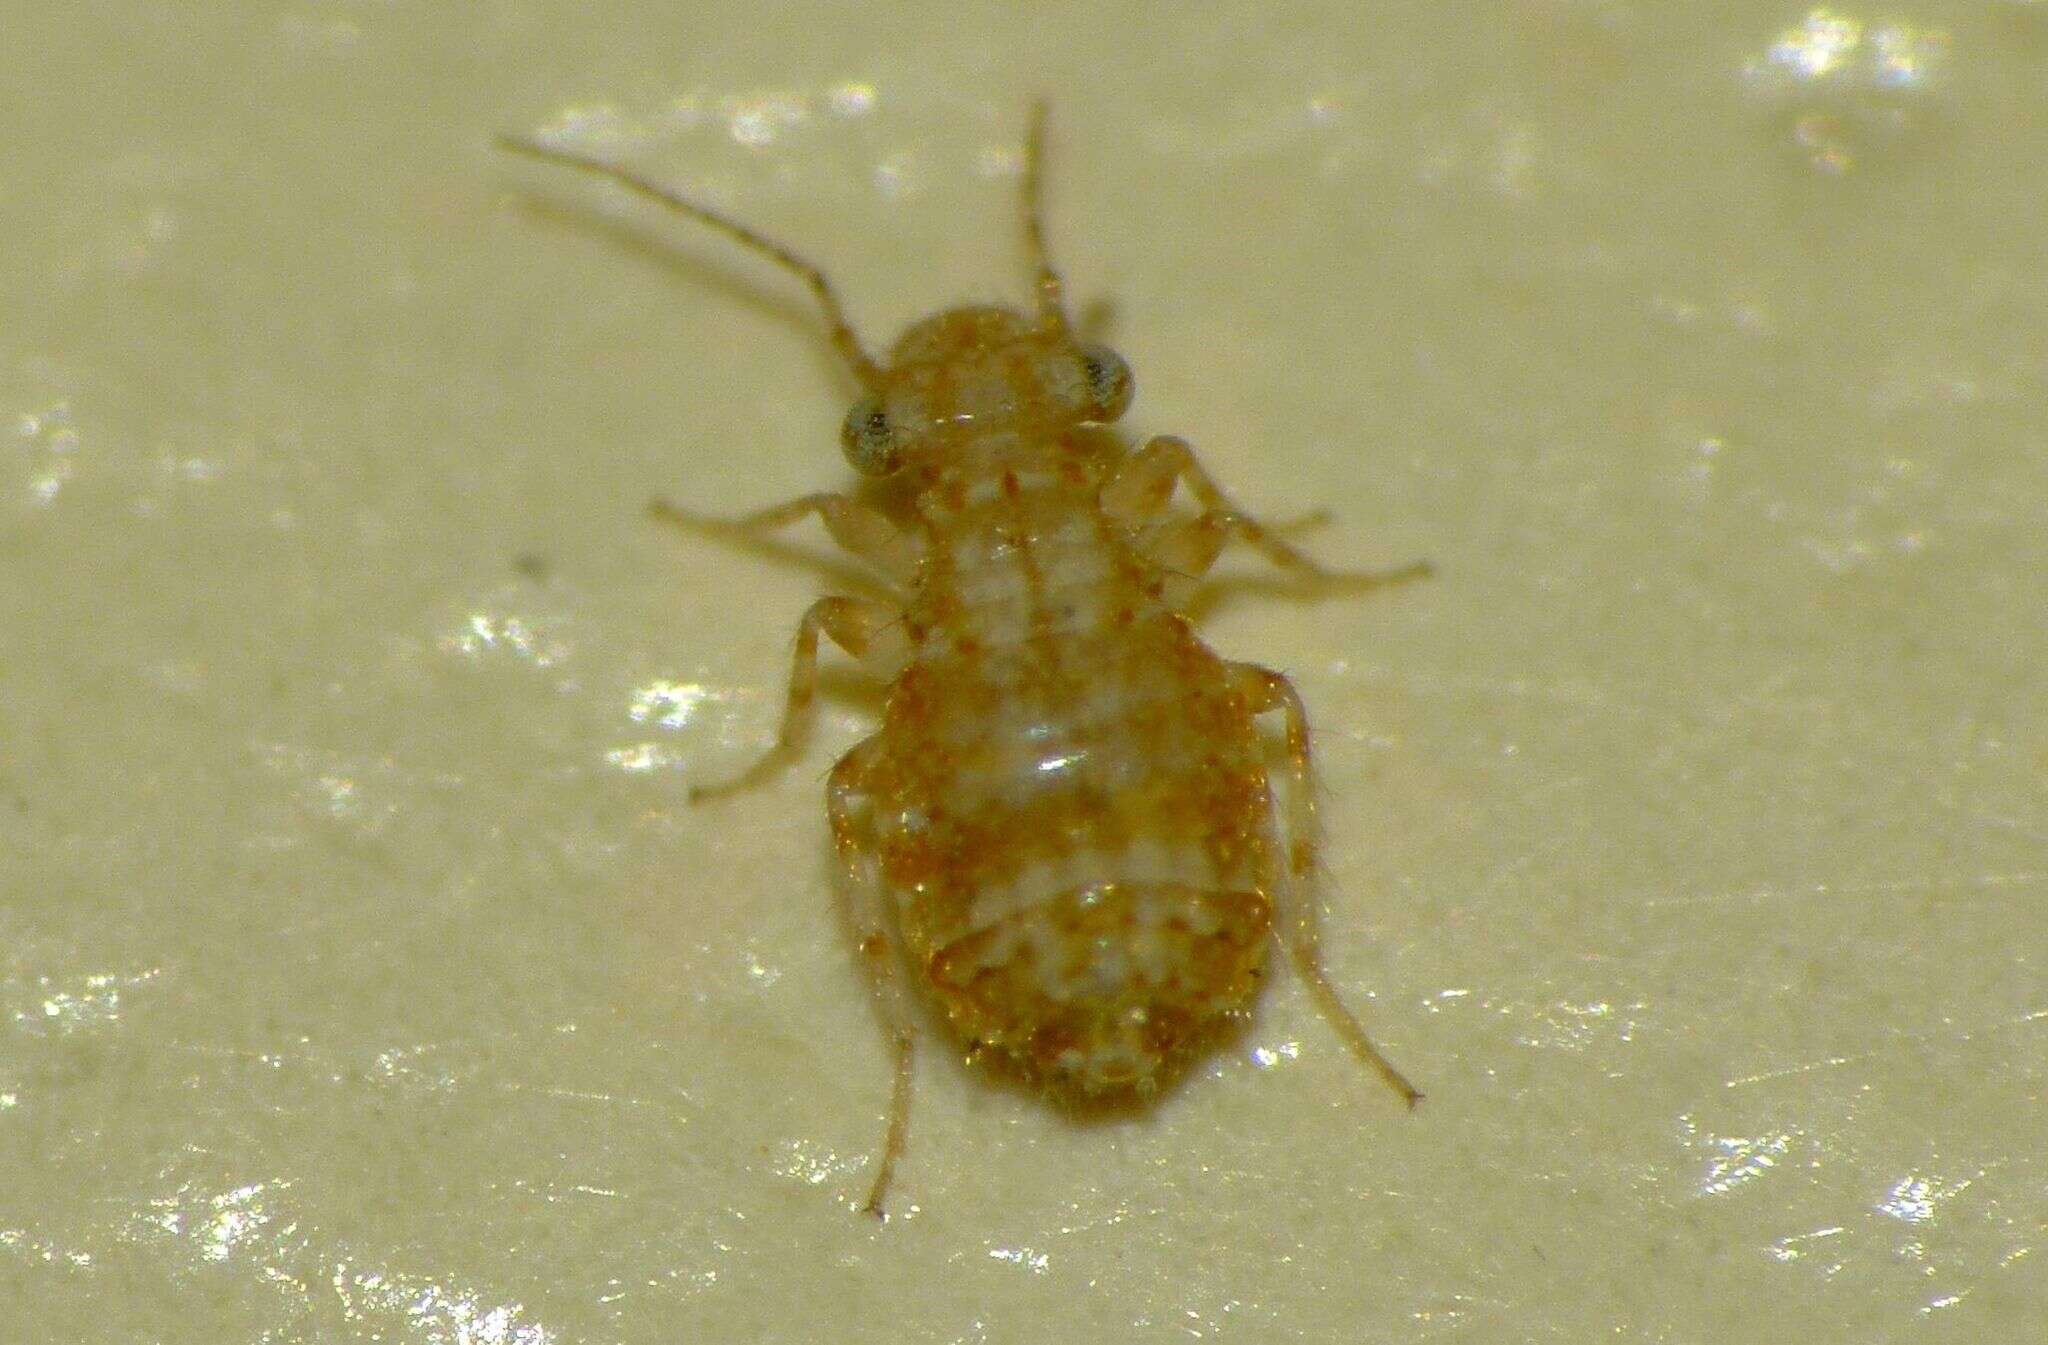 Image of Book lice